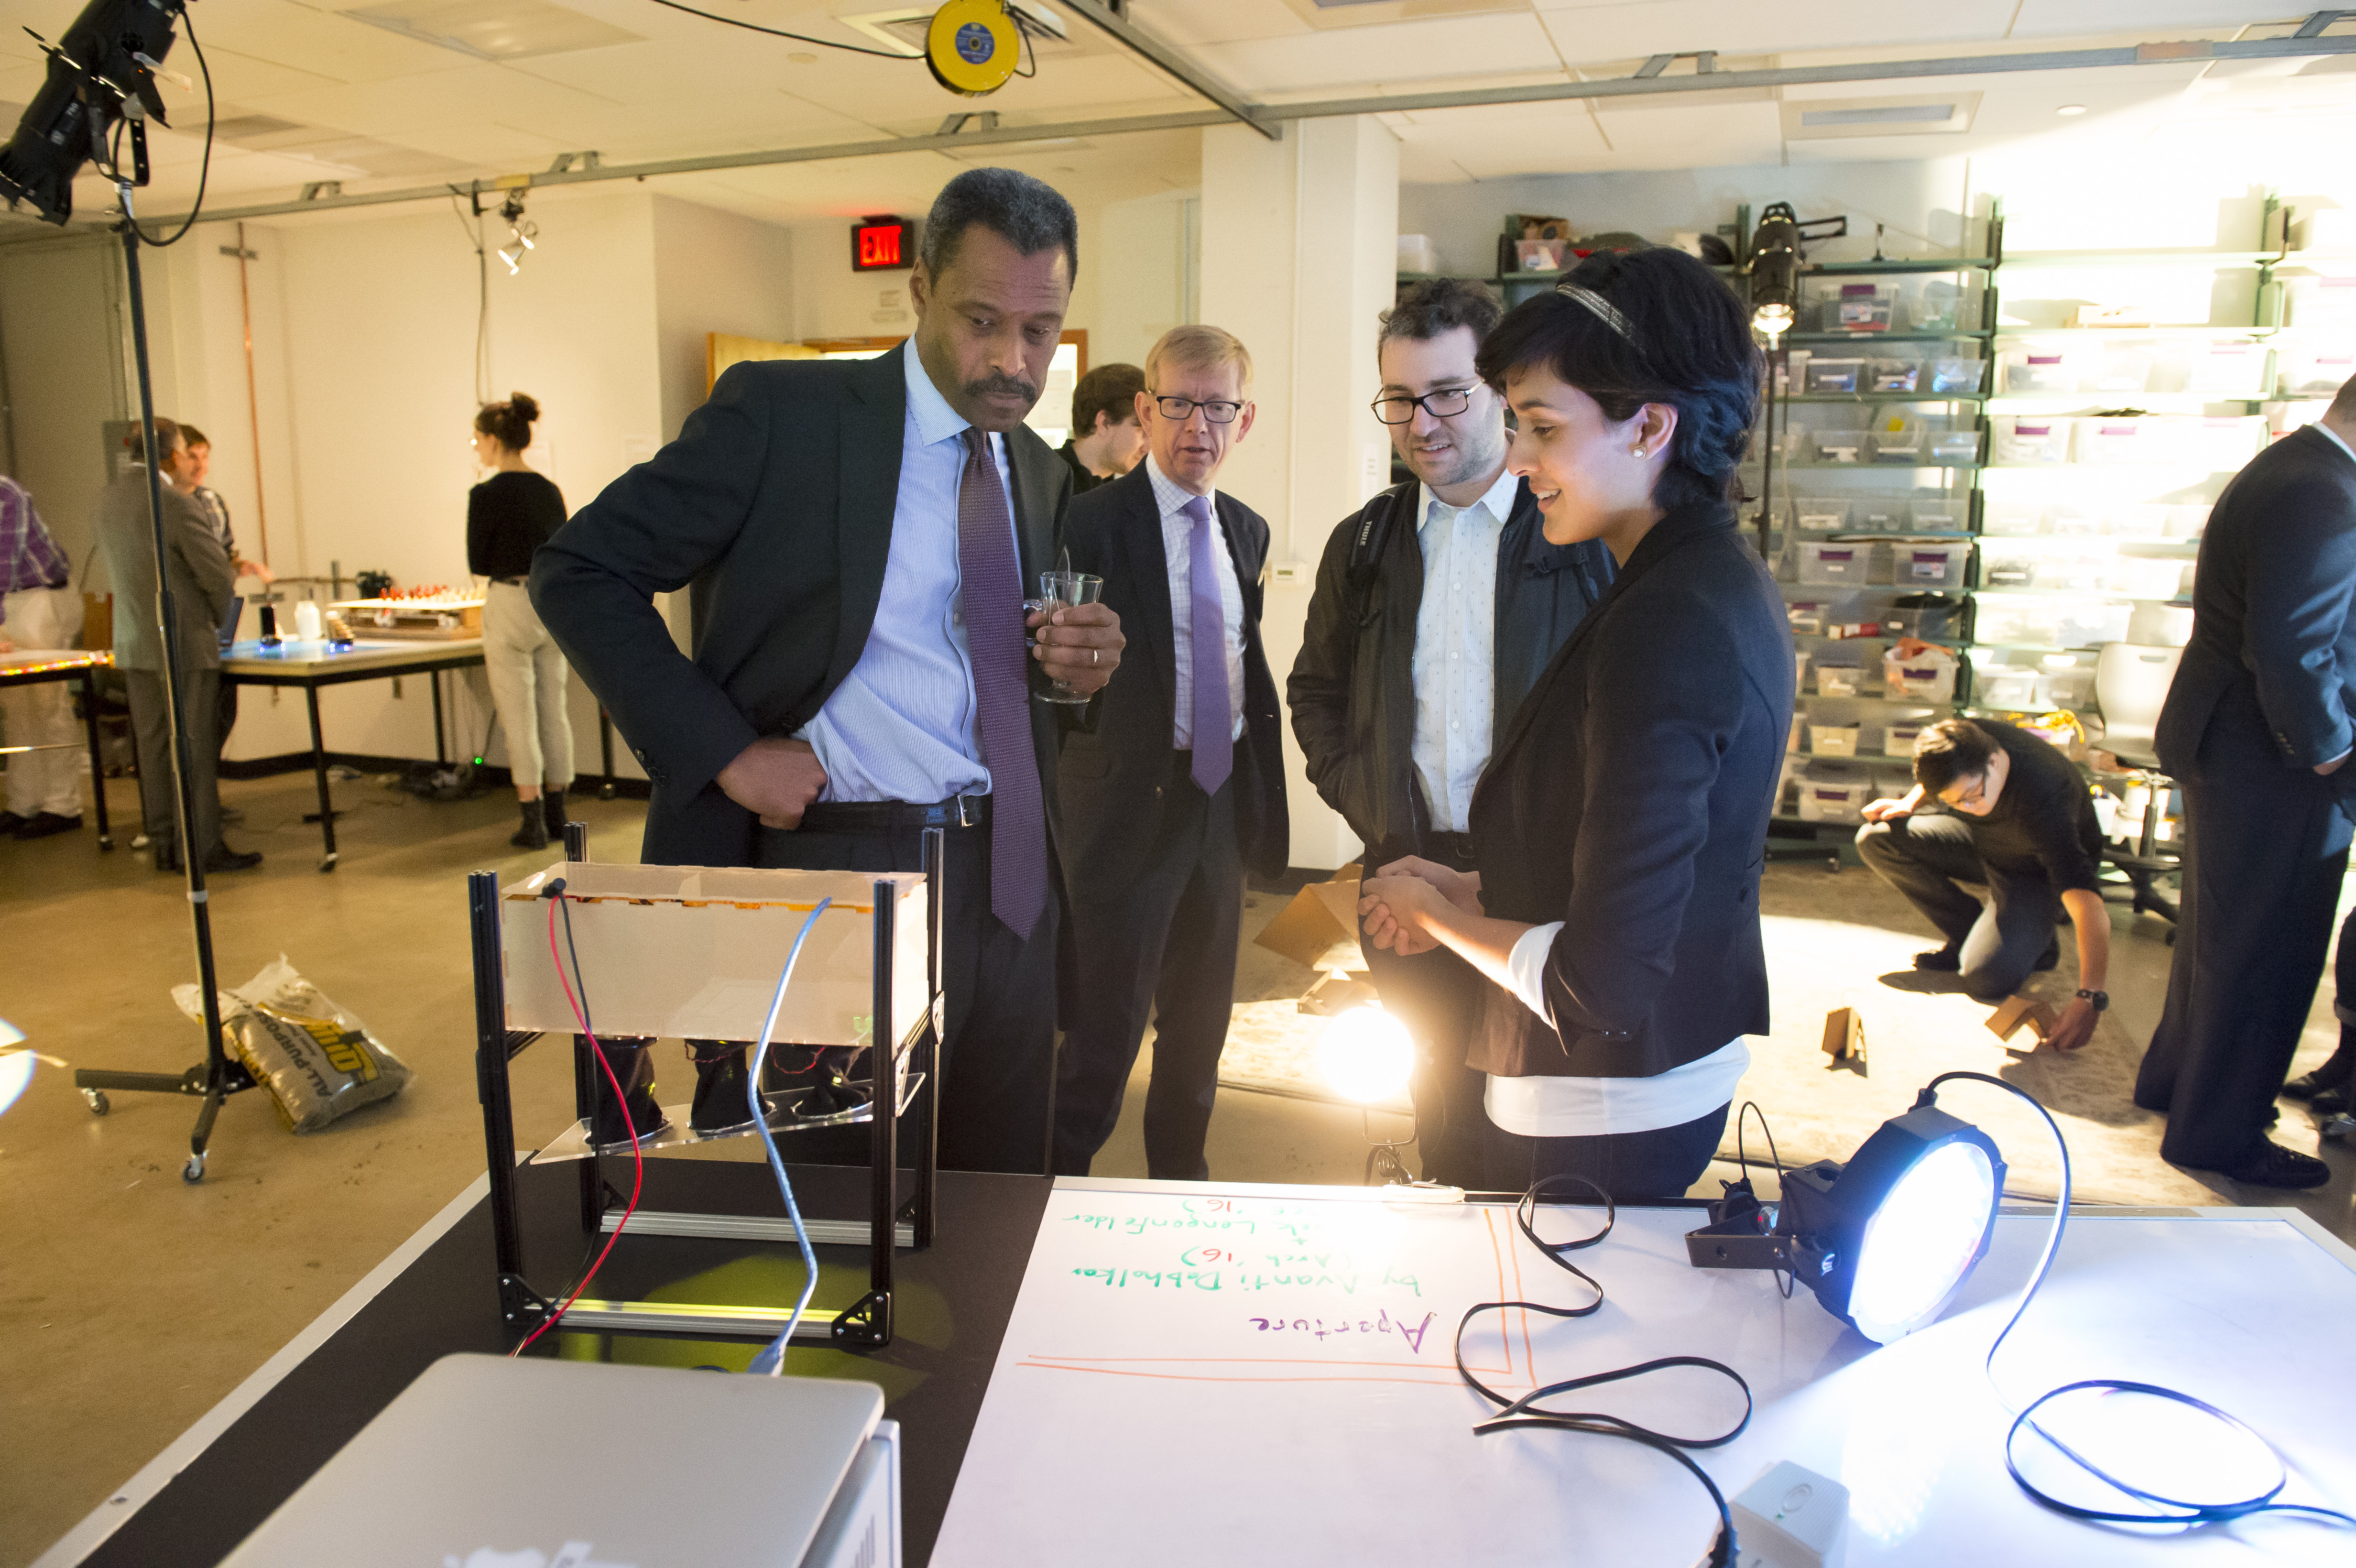 Avanti Dabholkar (right) describes a project that she created in an IDeATe Physical Computing class to PGAC member John Silvanus Wilson, Jr., Dean of Libraries Keith Webster, and PGAC member Matt Rogers (E 2004, 2005).